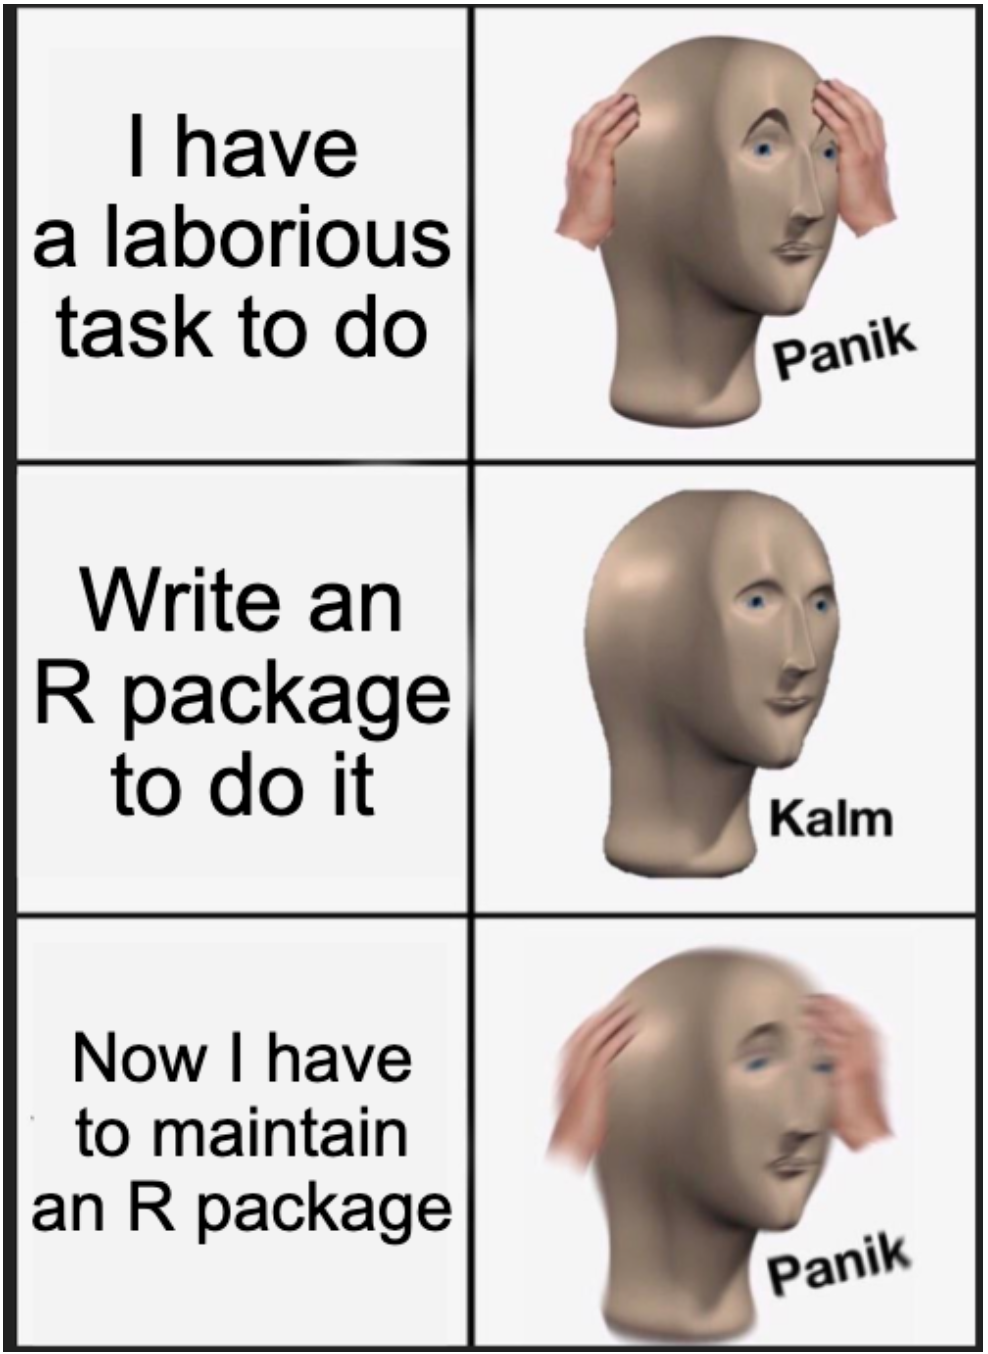 Panik meme with three panels. First panel has a panicked face saying 'I have a laborious task to do'. Second panel has a calm face saying 'write an R package to do it'. Third panel has an even more panicked face saying 'Now I have to maintain an R package'.